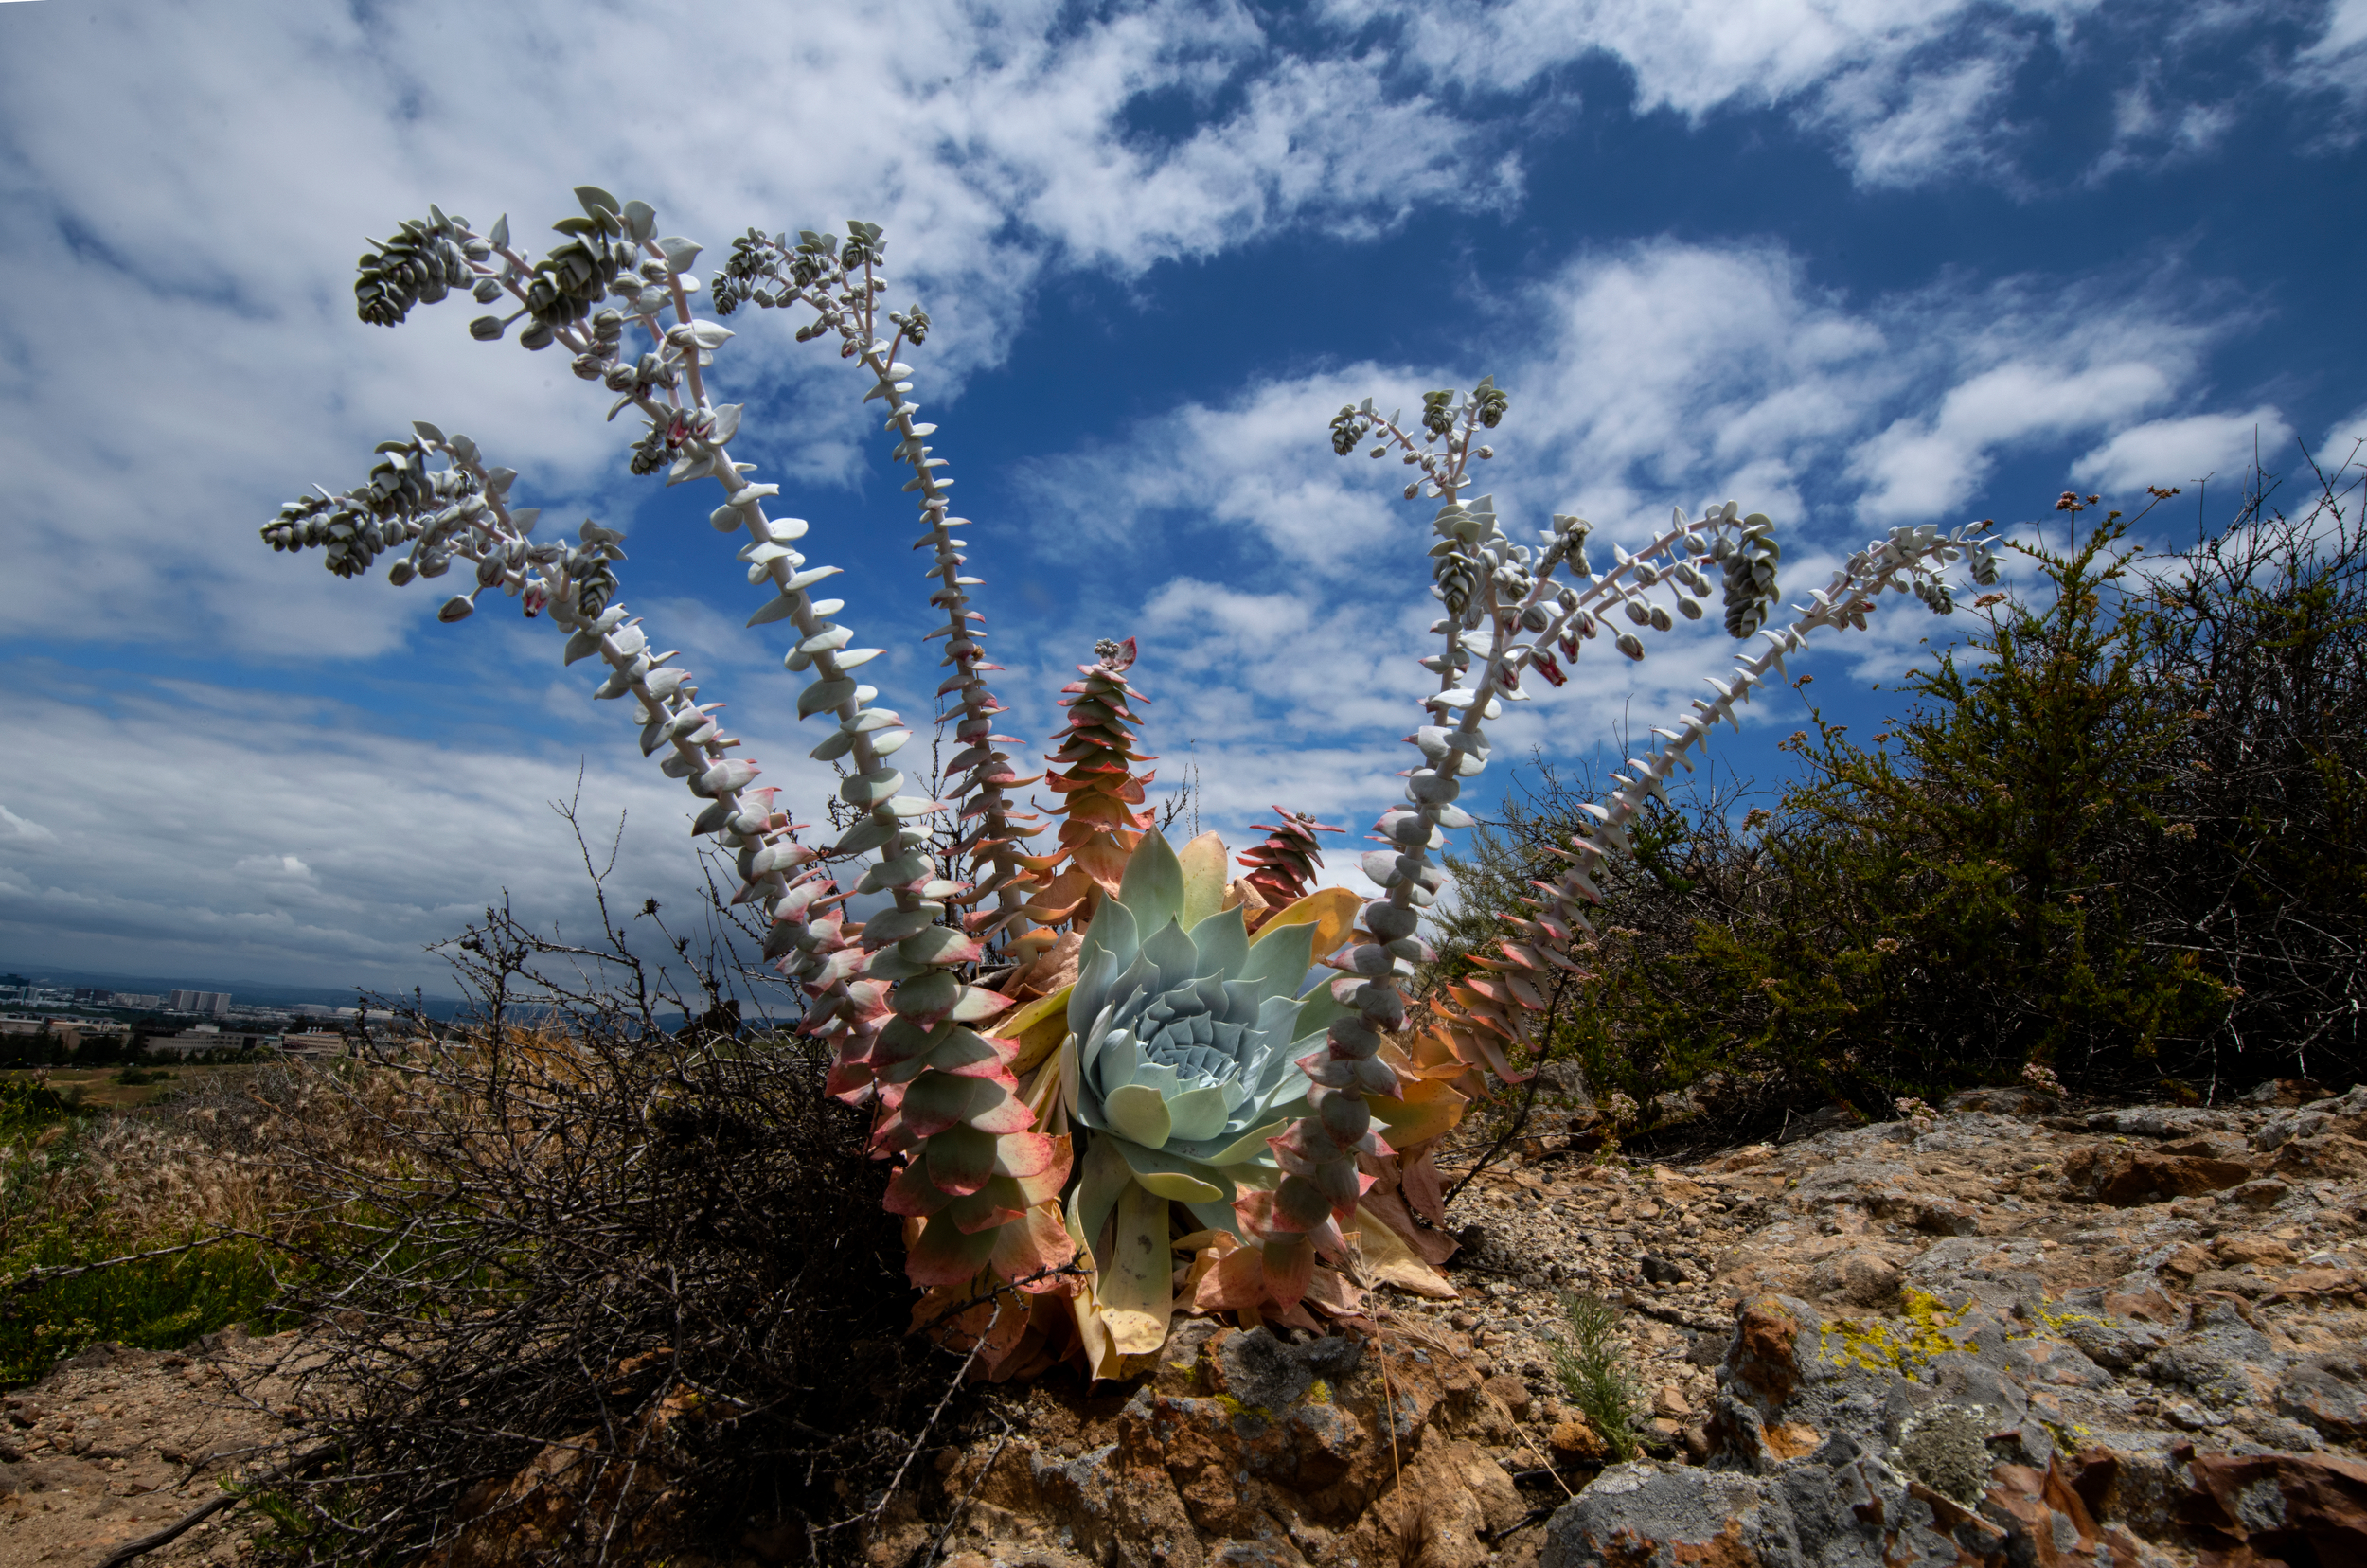 A chalk dudleya, a succulent that looks like it may have inspired a Dr. Seuss illustration, is one of many native plants protected in the UCI Ecological Preserve.